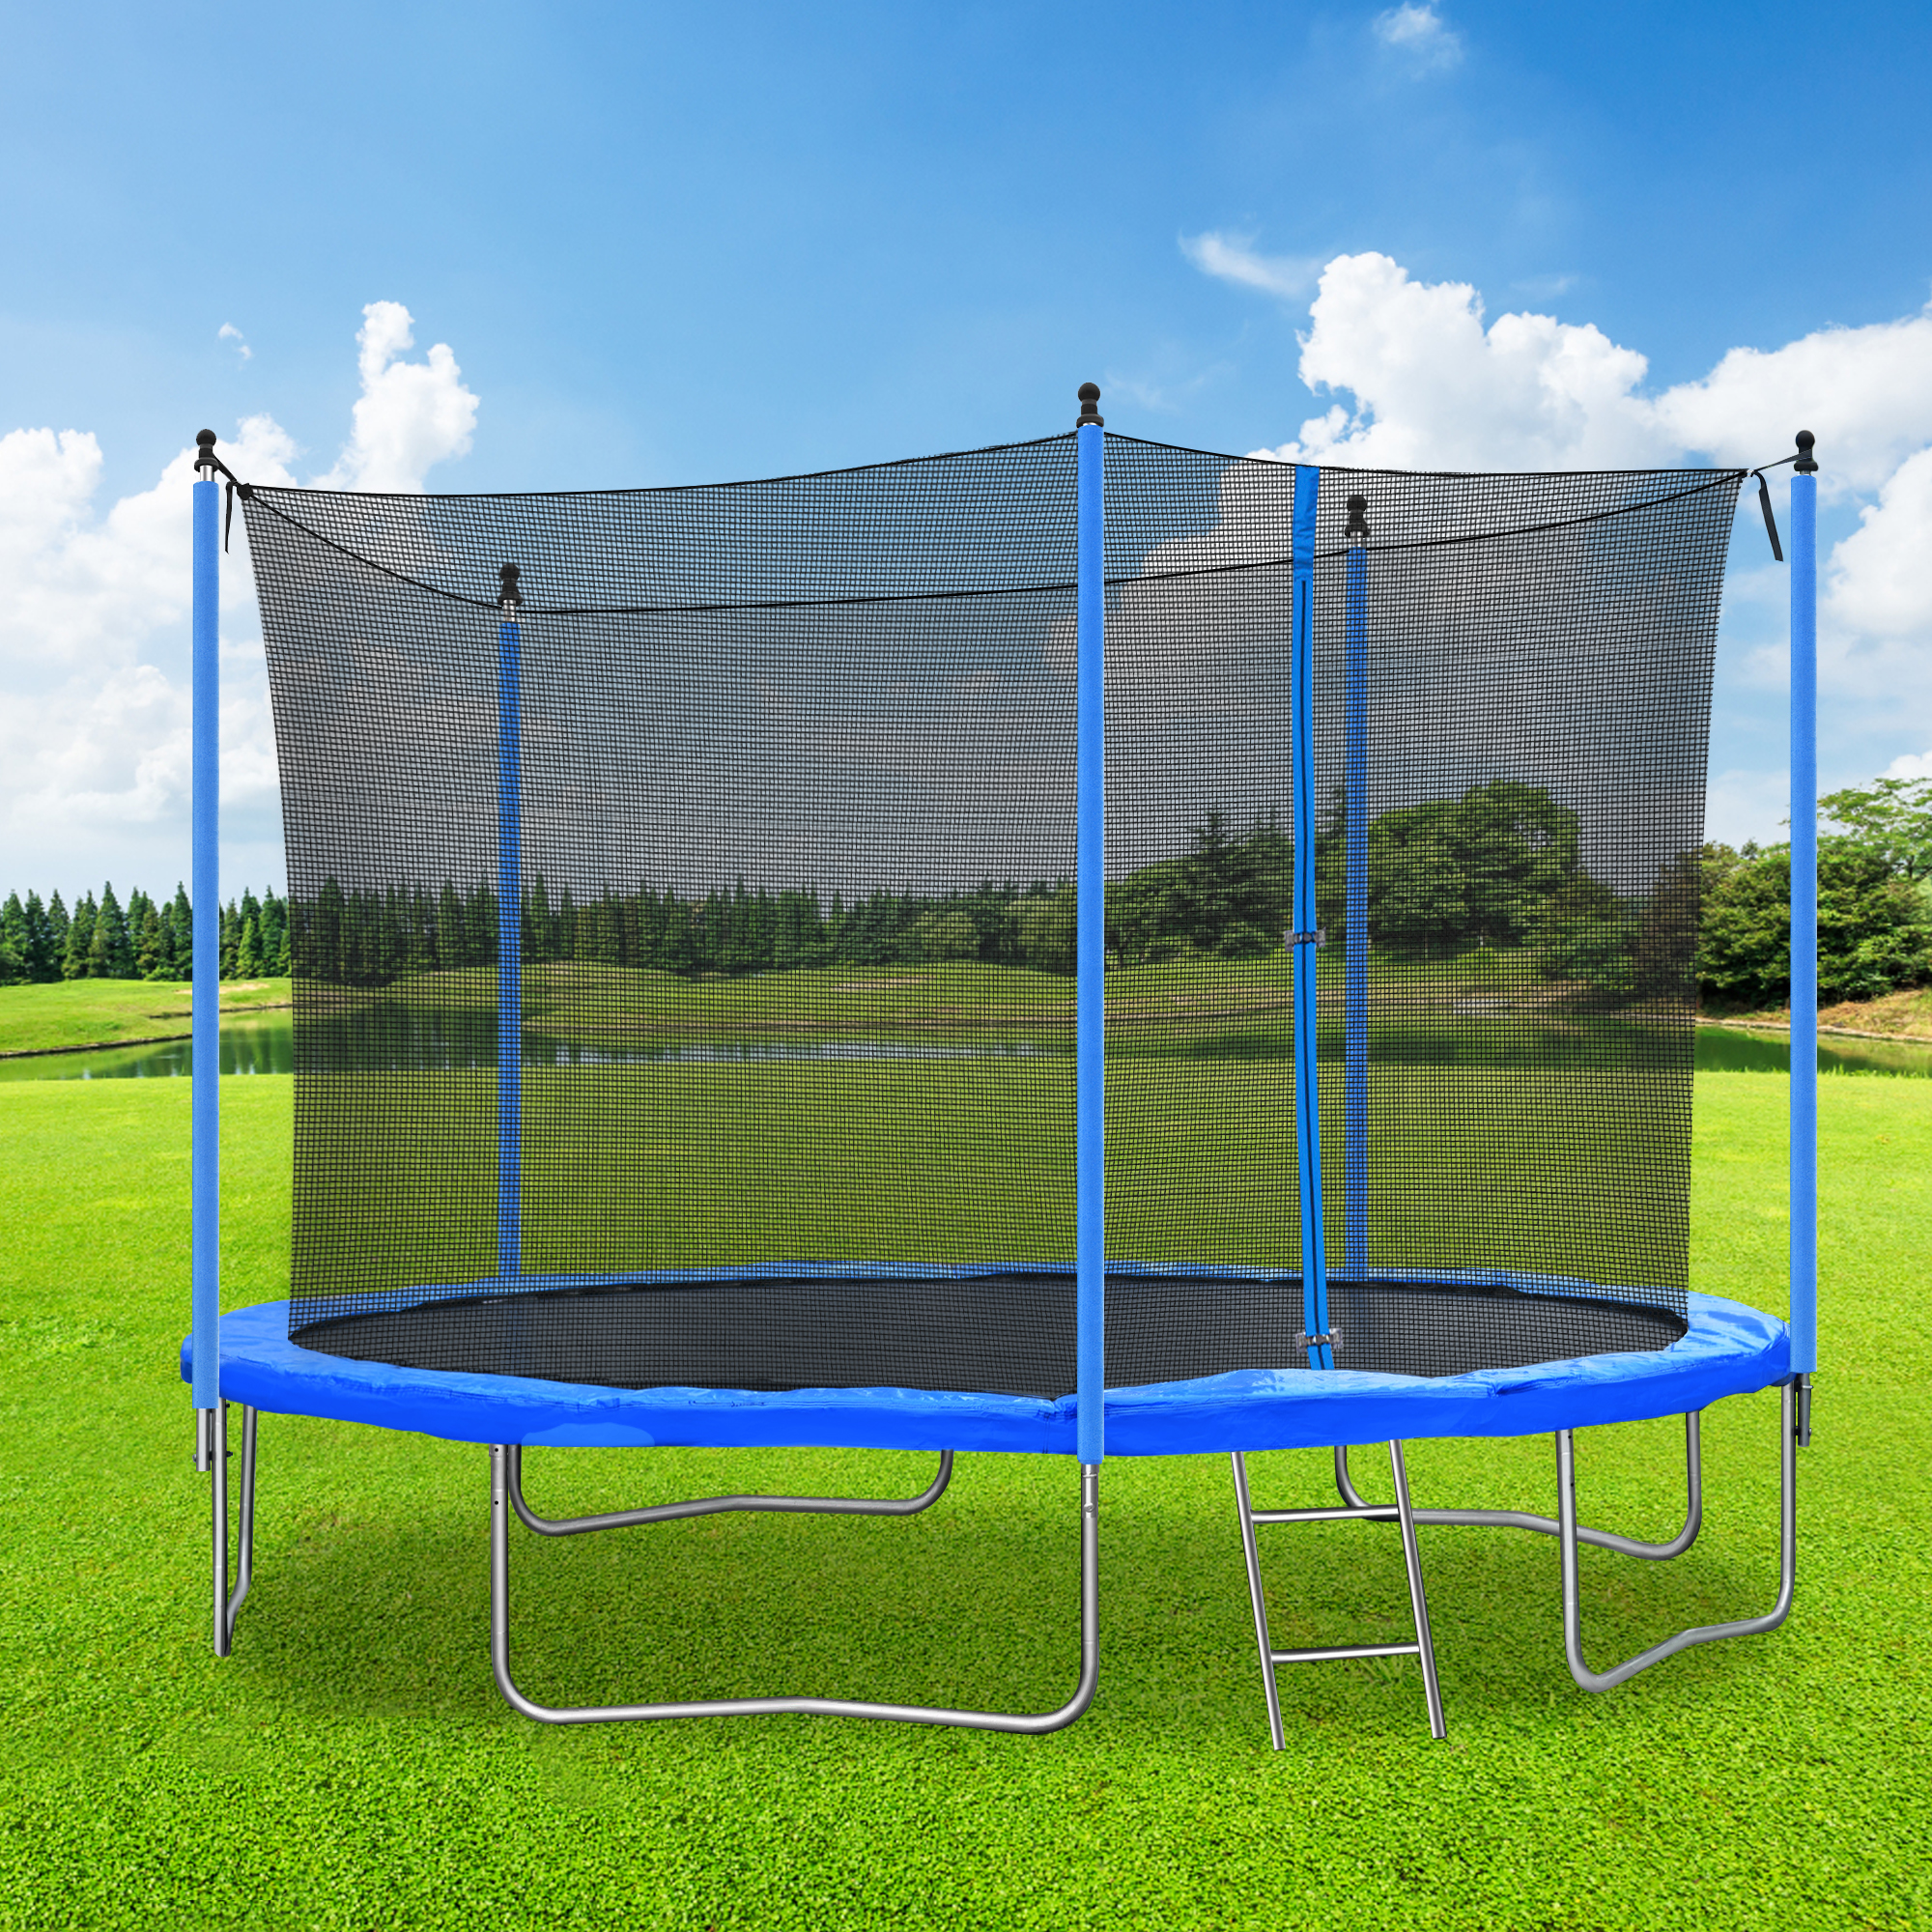 Euroco 12FT Trampoline for Kids, Solid Trampoline with Enclosure and Ladder for Adults and 4-5 Kids, Outdoor Recreation Trampoline, High Duty Safety - image 1 of 10